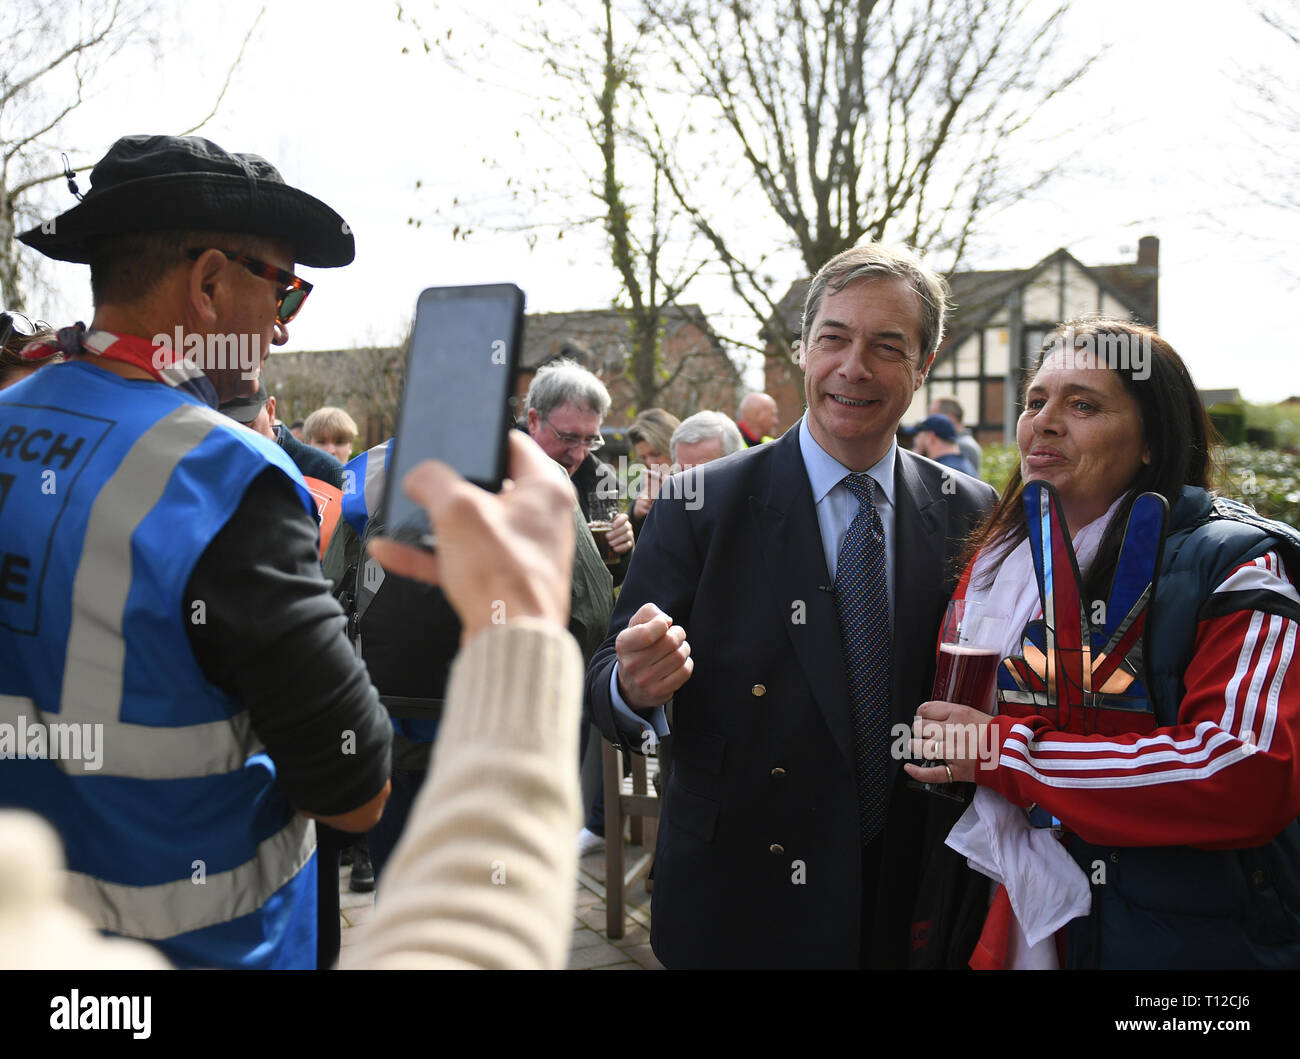 Former UKIP leader Nigel Farage poses for photos during the lunch break of the March to Leave protest in Nuthall, Nottingham on their way to London over a 14-day period, arriving in the capital on March 29, where a mass rally will take place on Parliament Square. Stock Photo